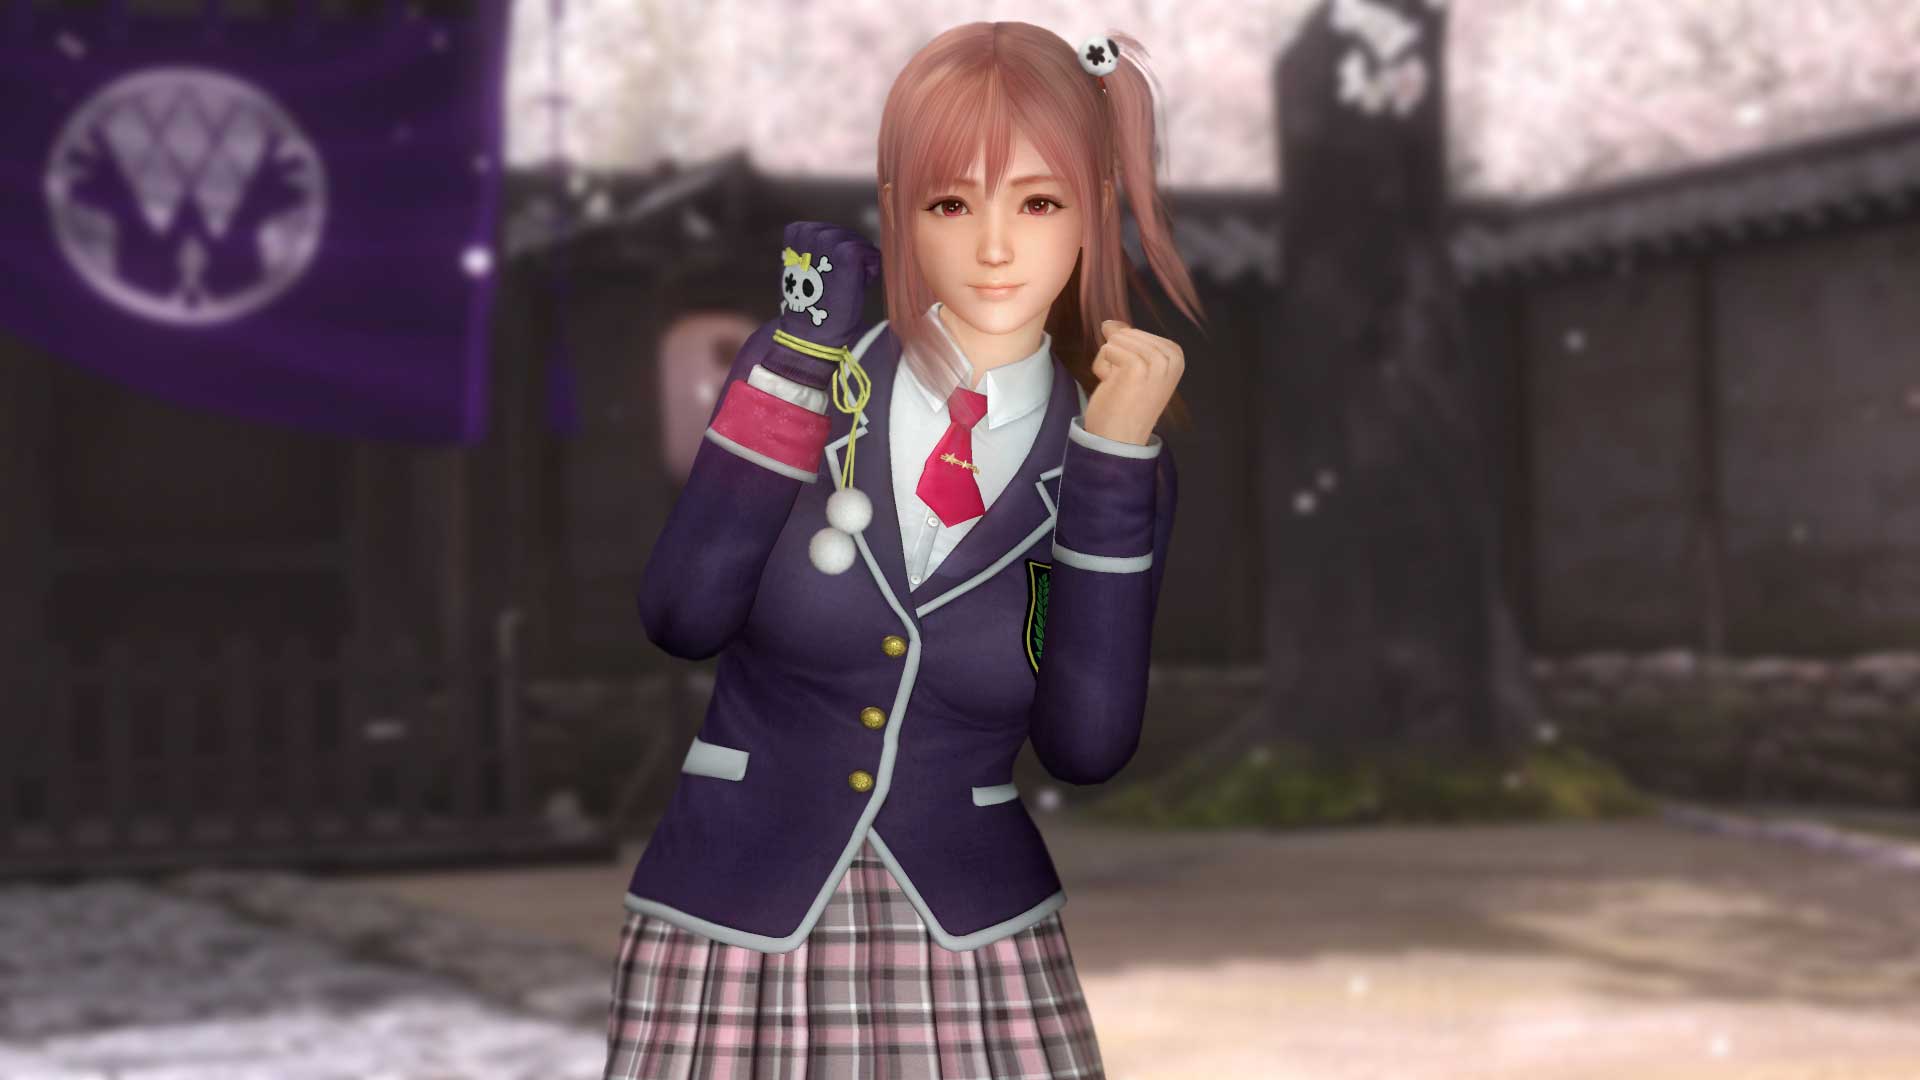 “Dead or Alive 5: Last Round” Reveals New Character - She's a Schoolgirl